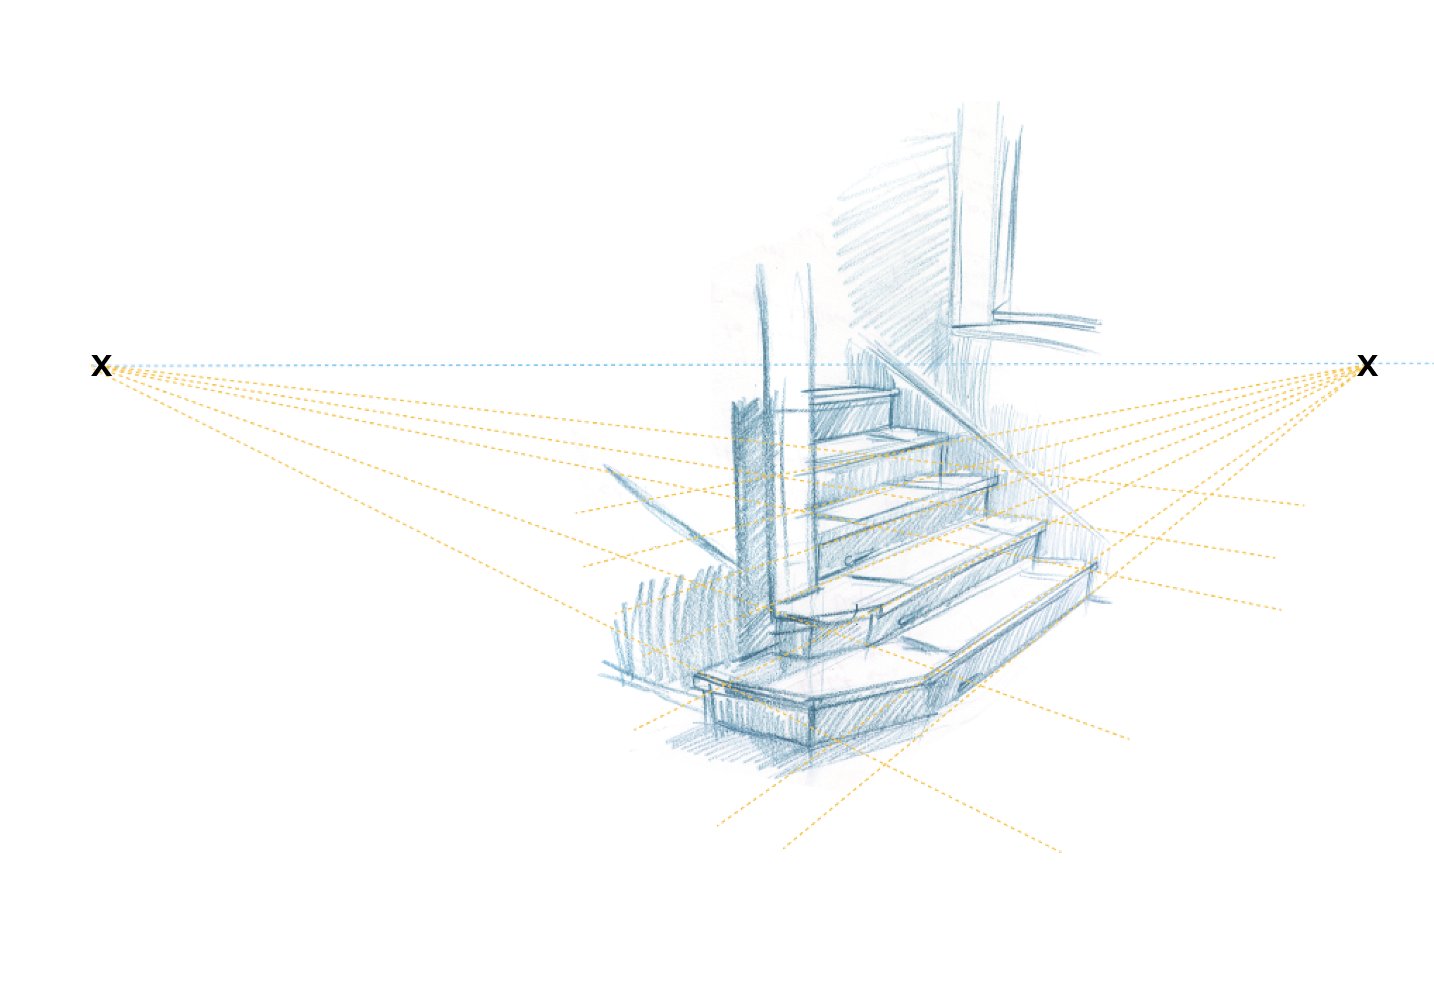 Eileen Liu - Architecture perspective drawing